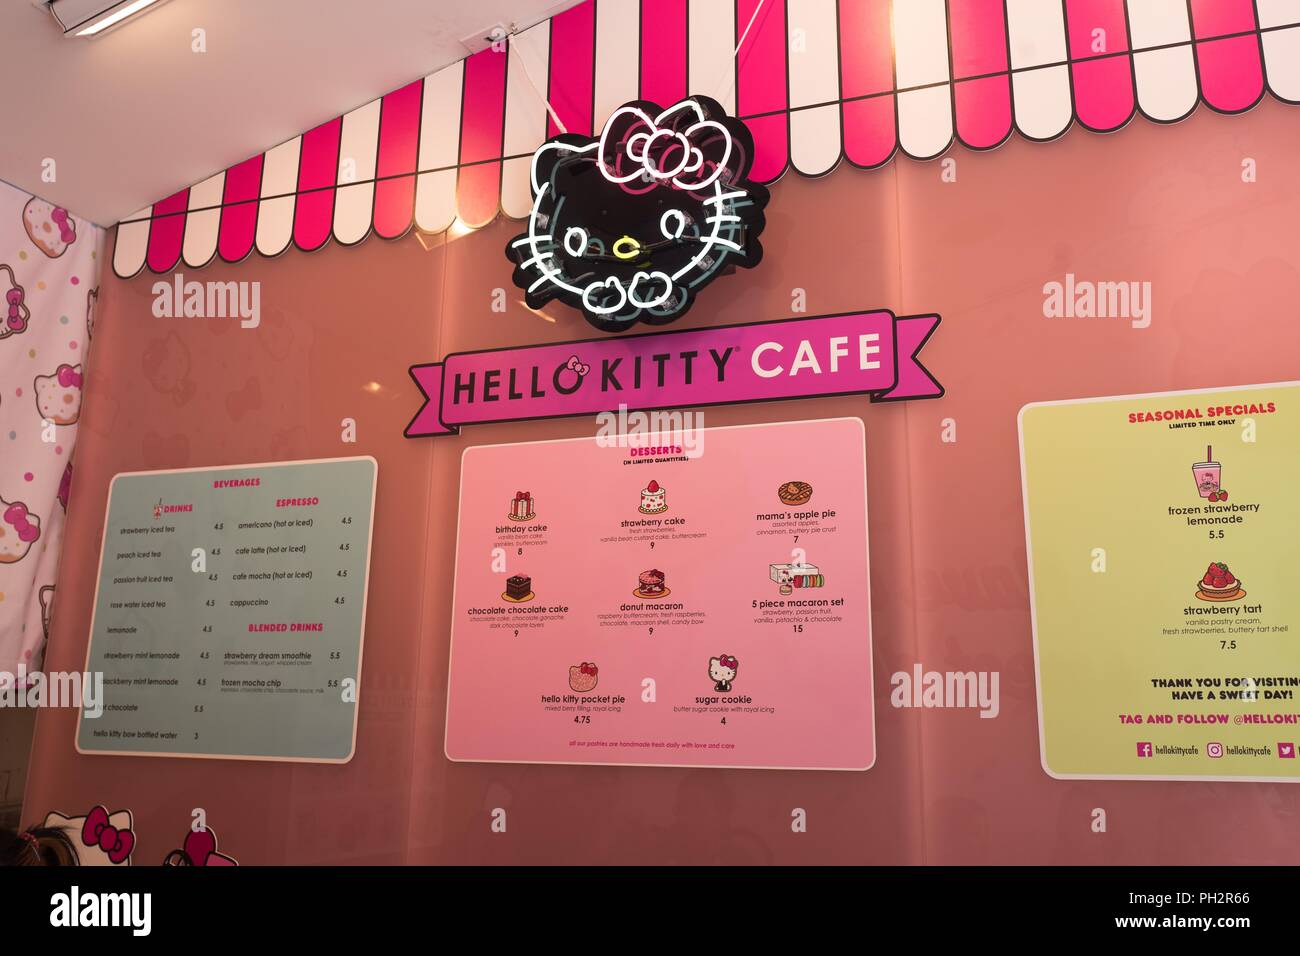 Interior of the Hello Kitty Cafe, a newly opened cafe operated by Japanese company Sanrio, on Santana Row in the Silicon Valley, San Jose, California, July 18, 2018. () Stock Photo